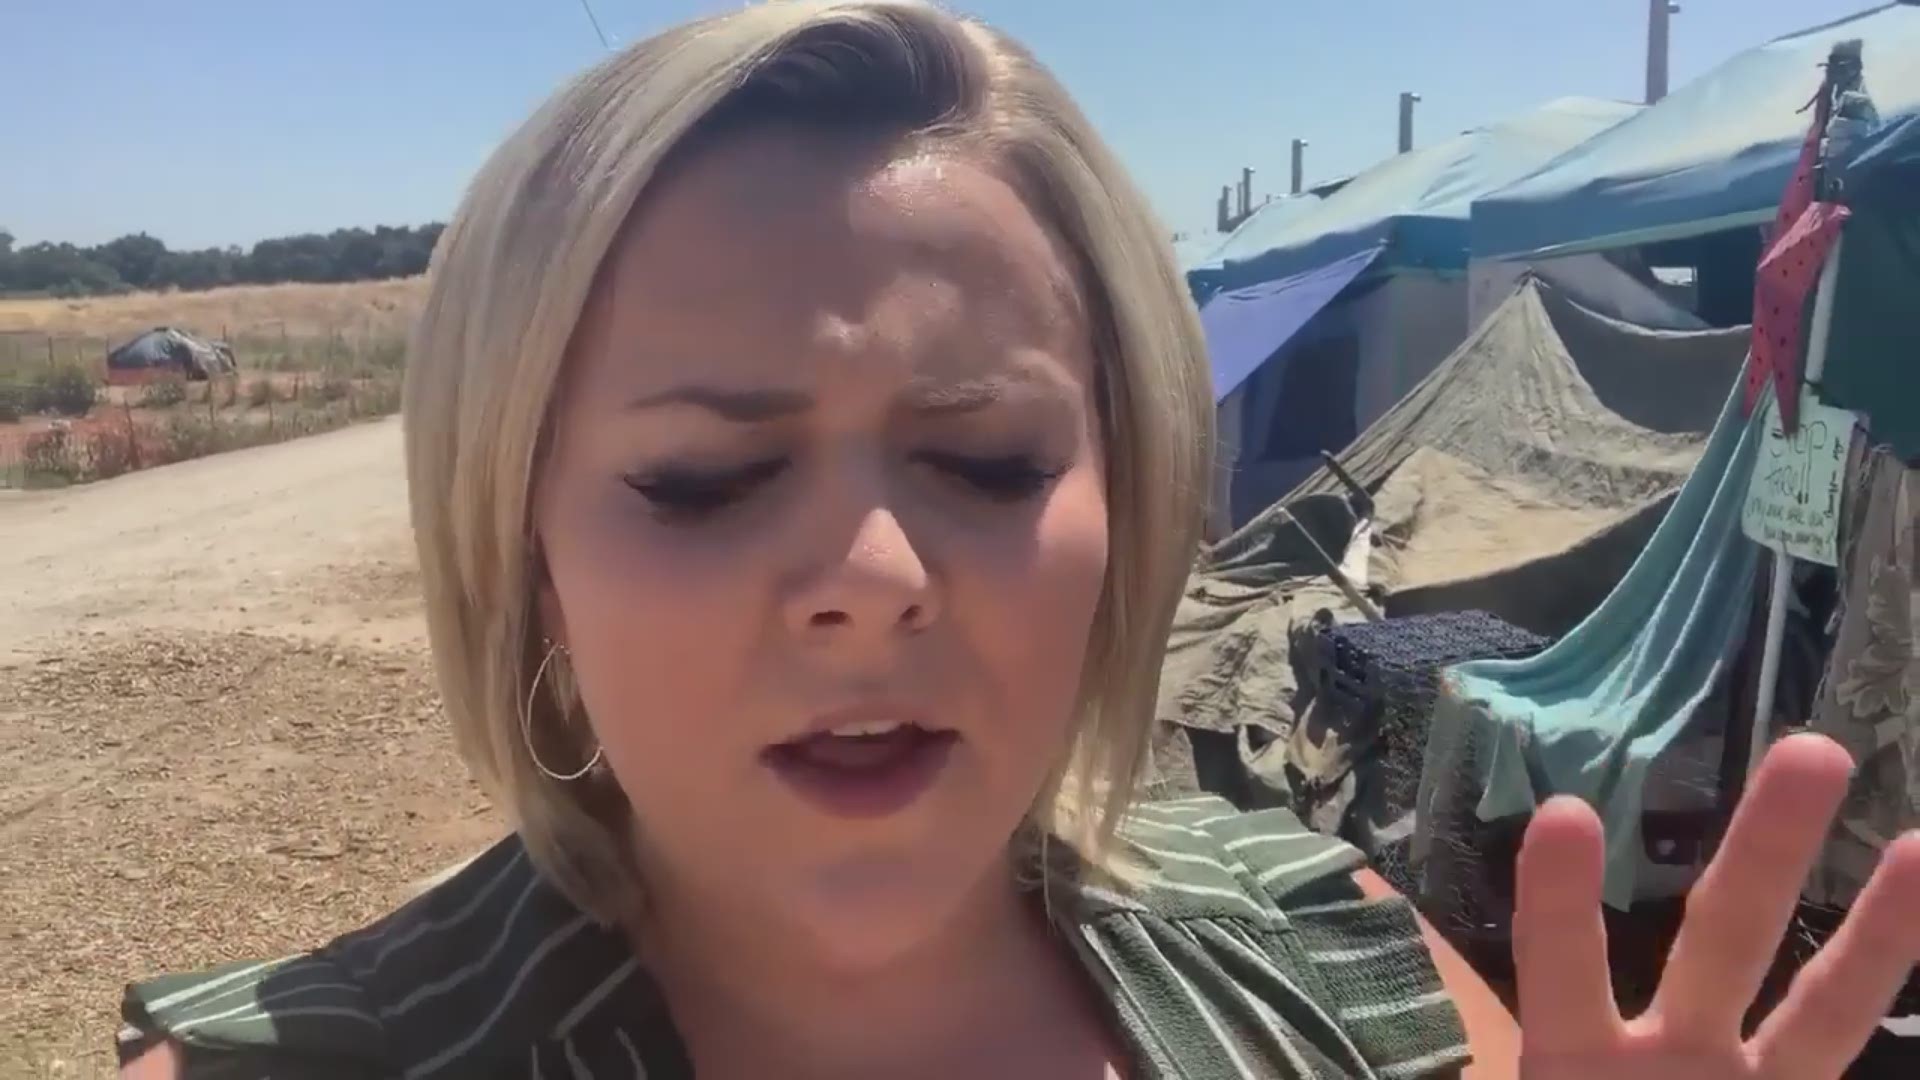 As 100-degree conditions are expected over the next three days in Modesto, Lena Howland went back to check in on how people living at the Modesto Outdoor Emergency Shelter under the 9th Street bridge are doing in this heat and what they are doing to stay cool.